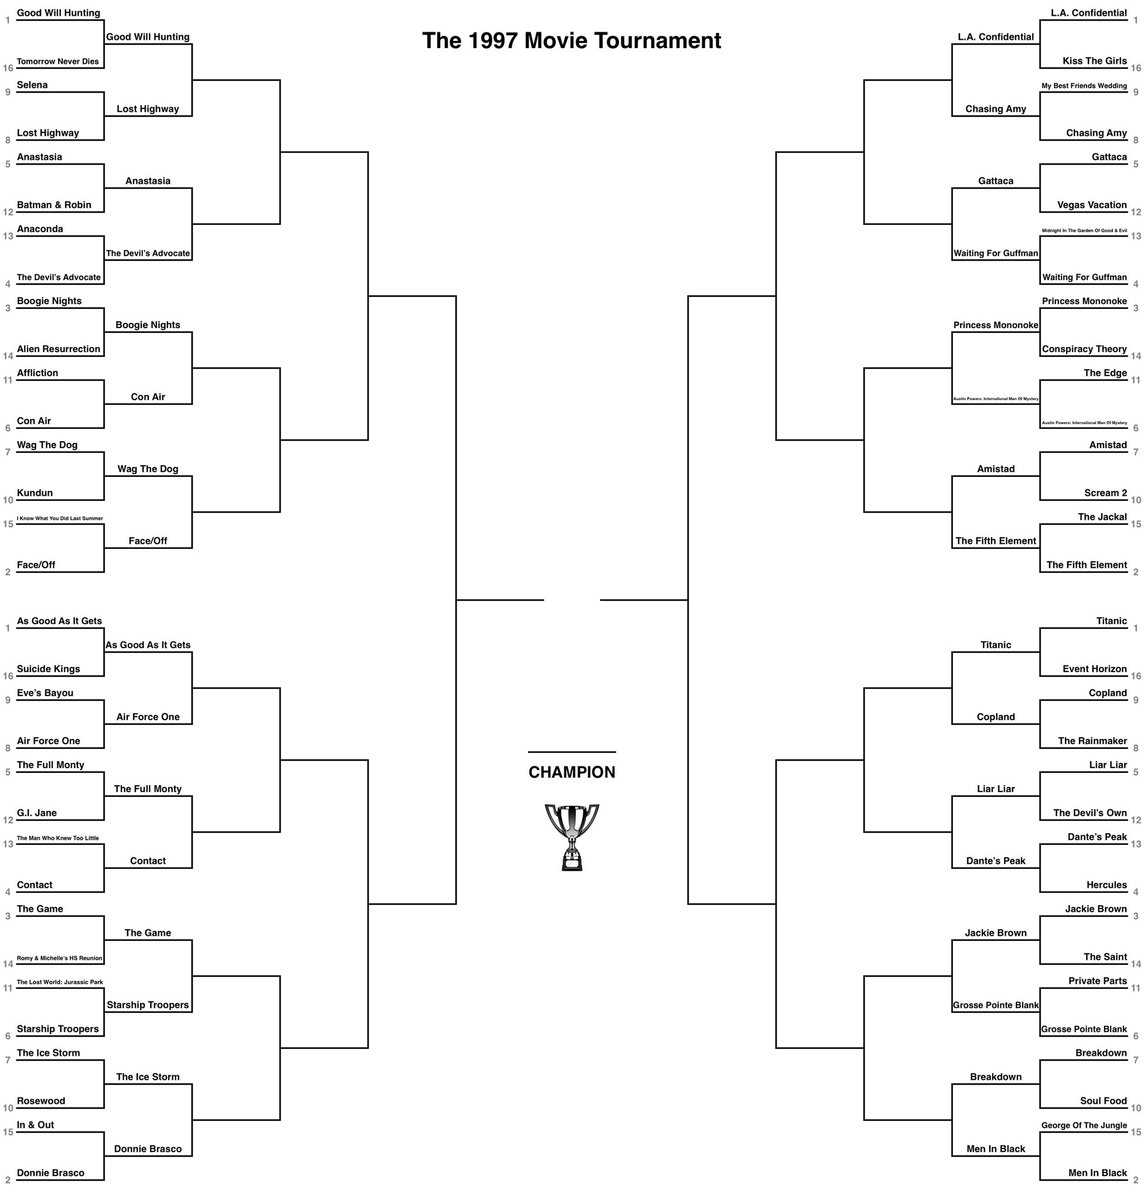 Here it is, round 2 of the 1997 movie tournament. There were very few upsets in round one but this is where things are gonna get interesting. There are some really tough ones in this round. Let’s see how it plays out.